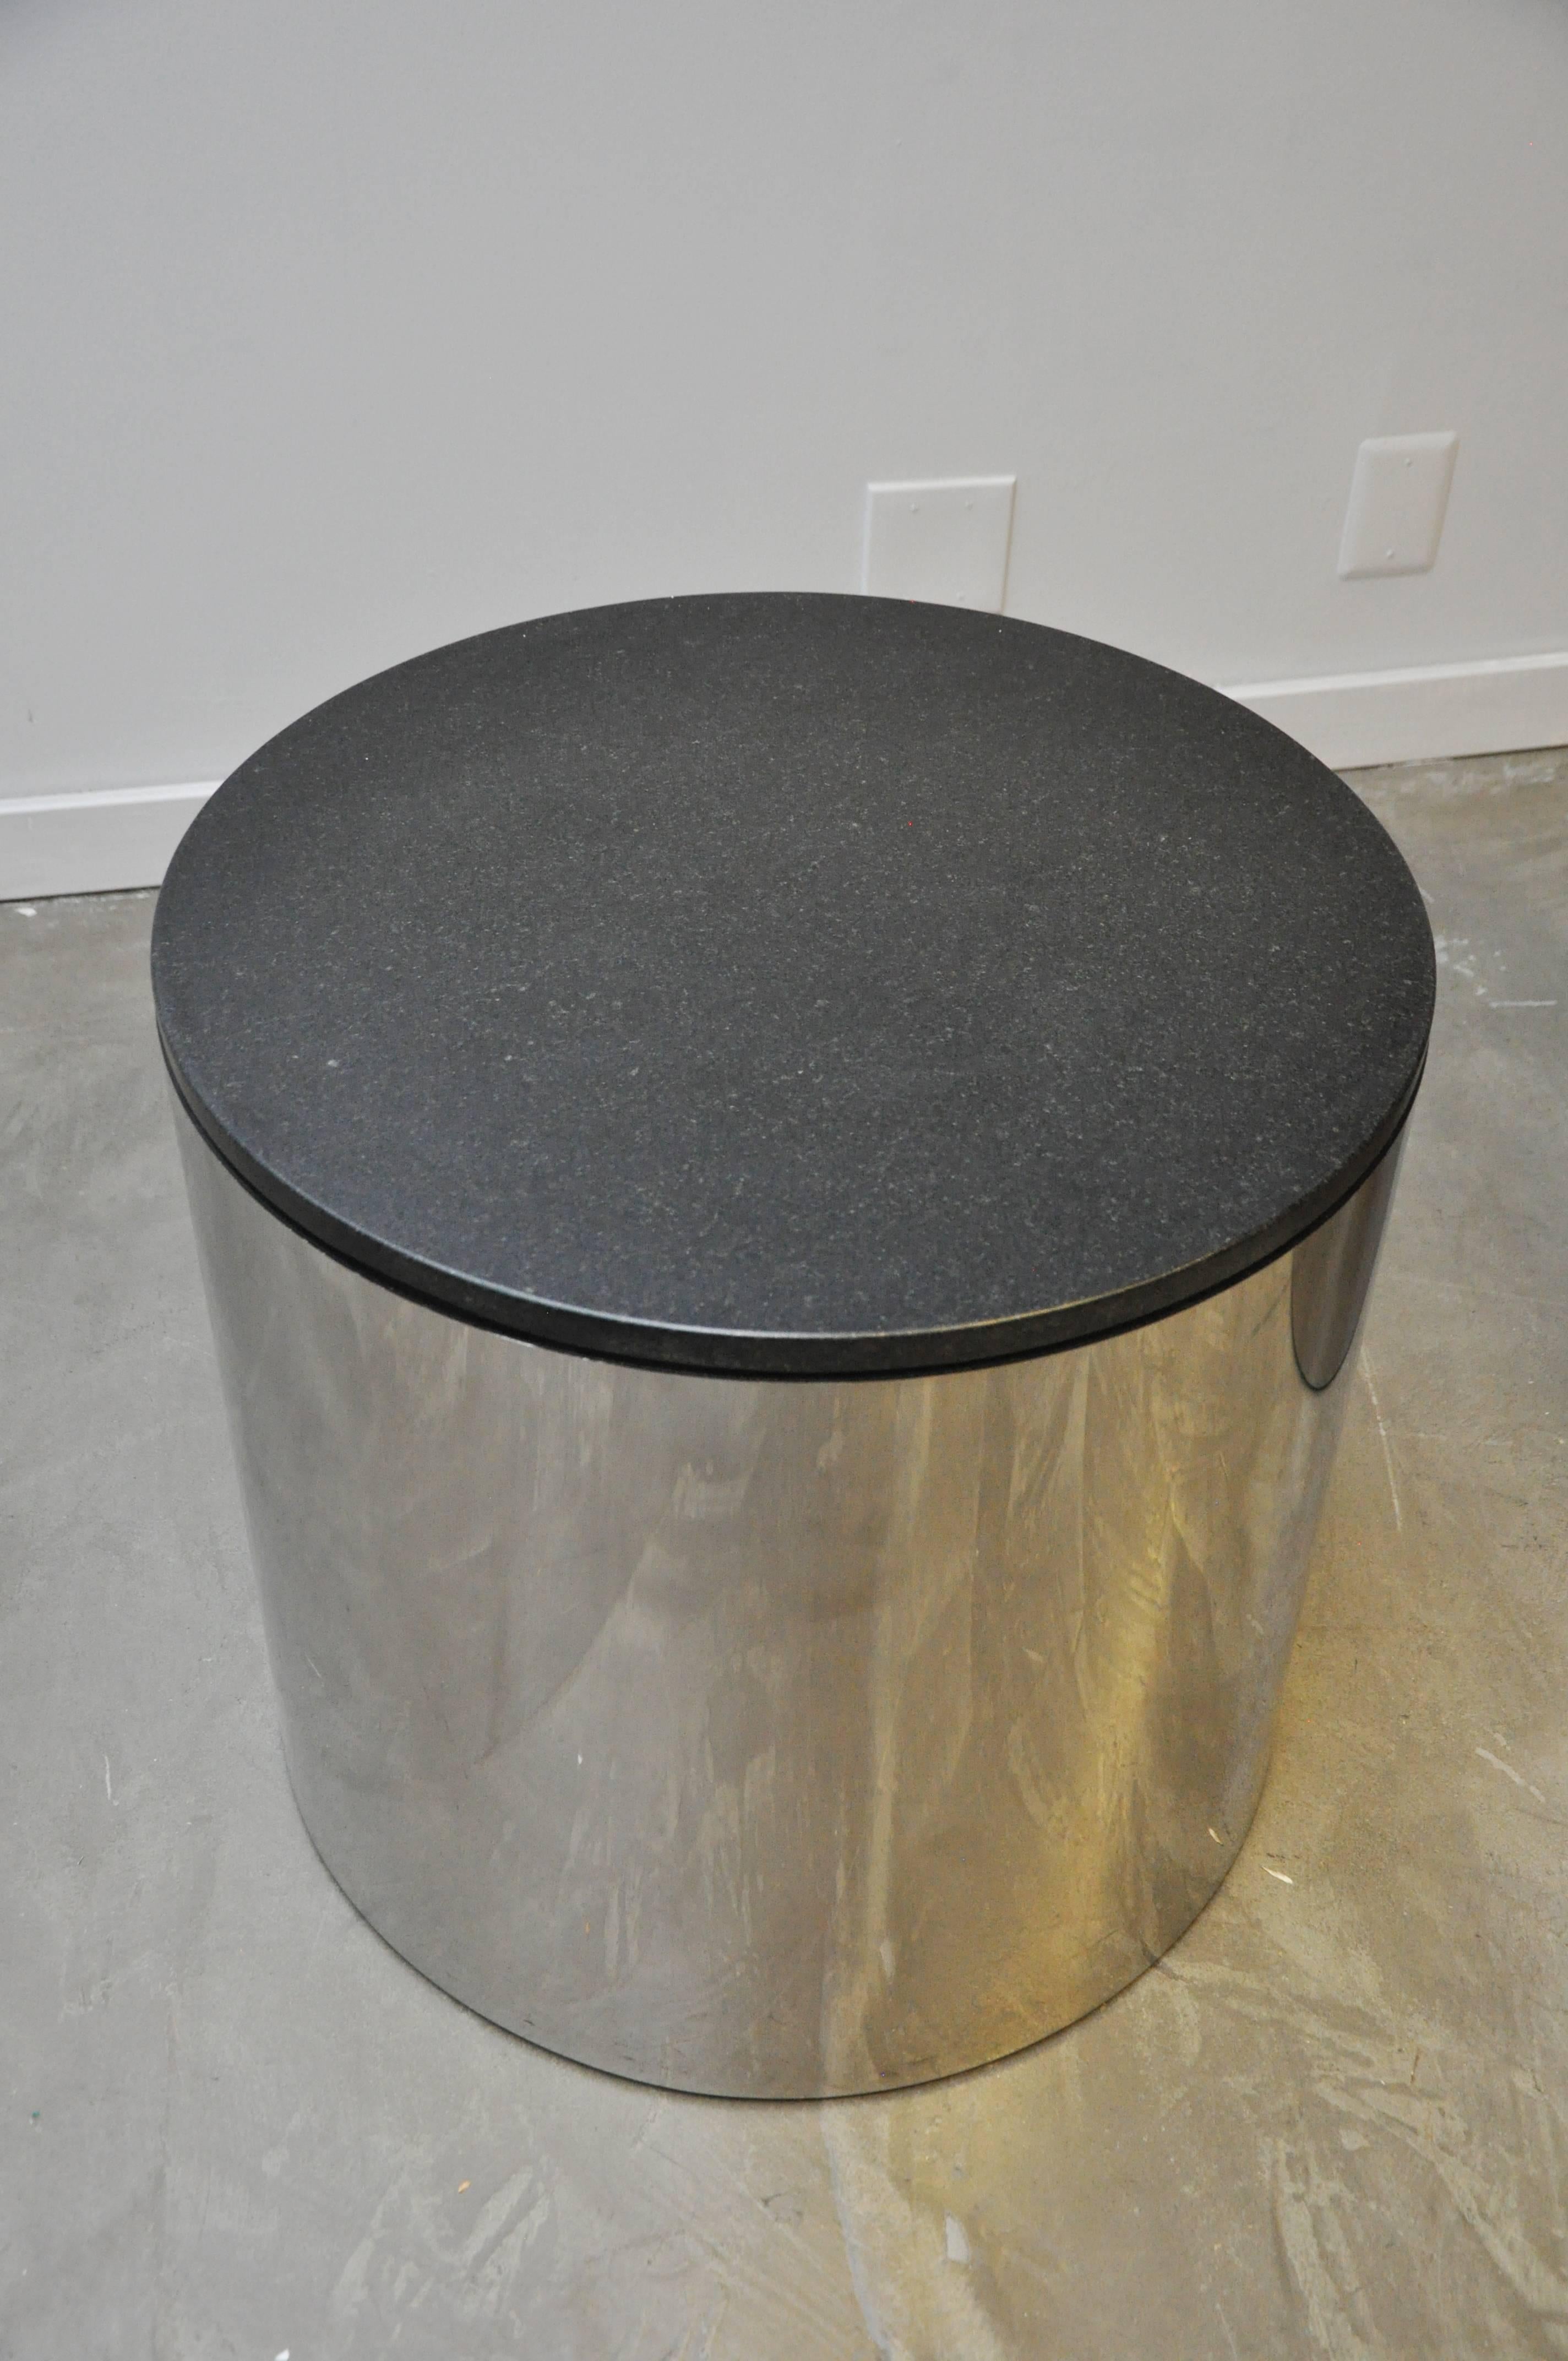 Pair of stainless and black granite side tables by Paul Mayan for Habitat.